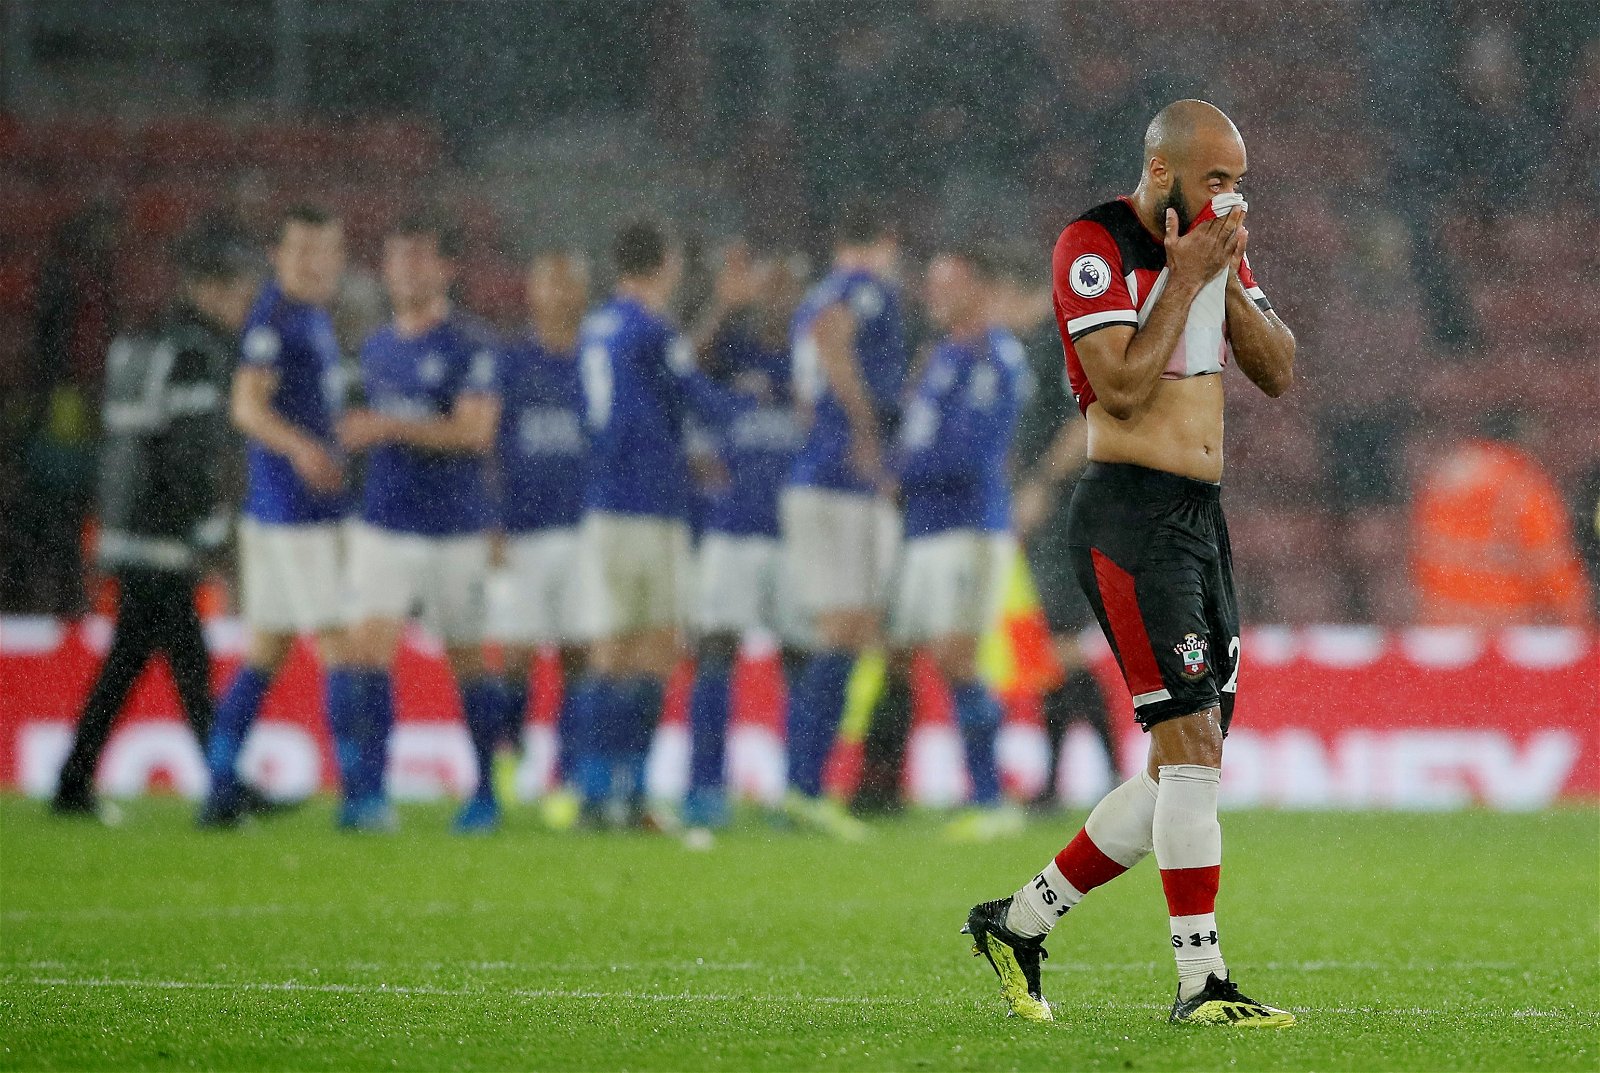 Southampton players donate wages to charity after Leicester humiliation